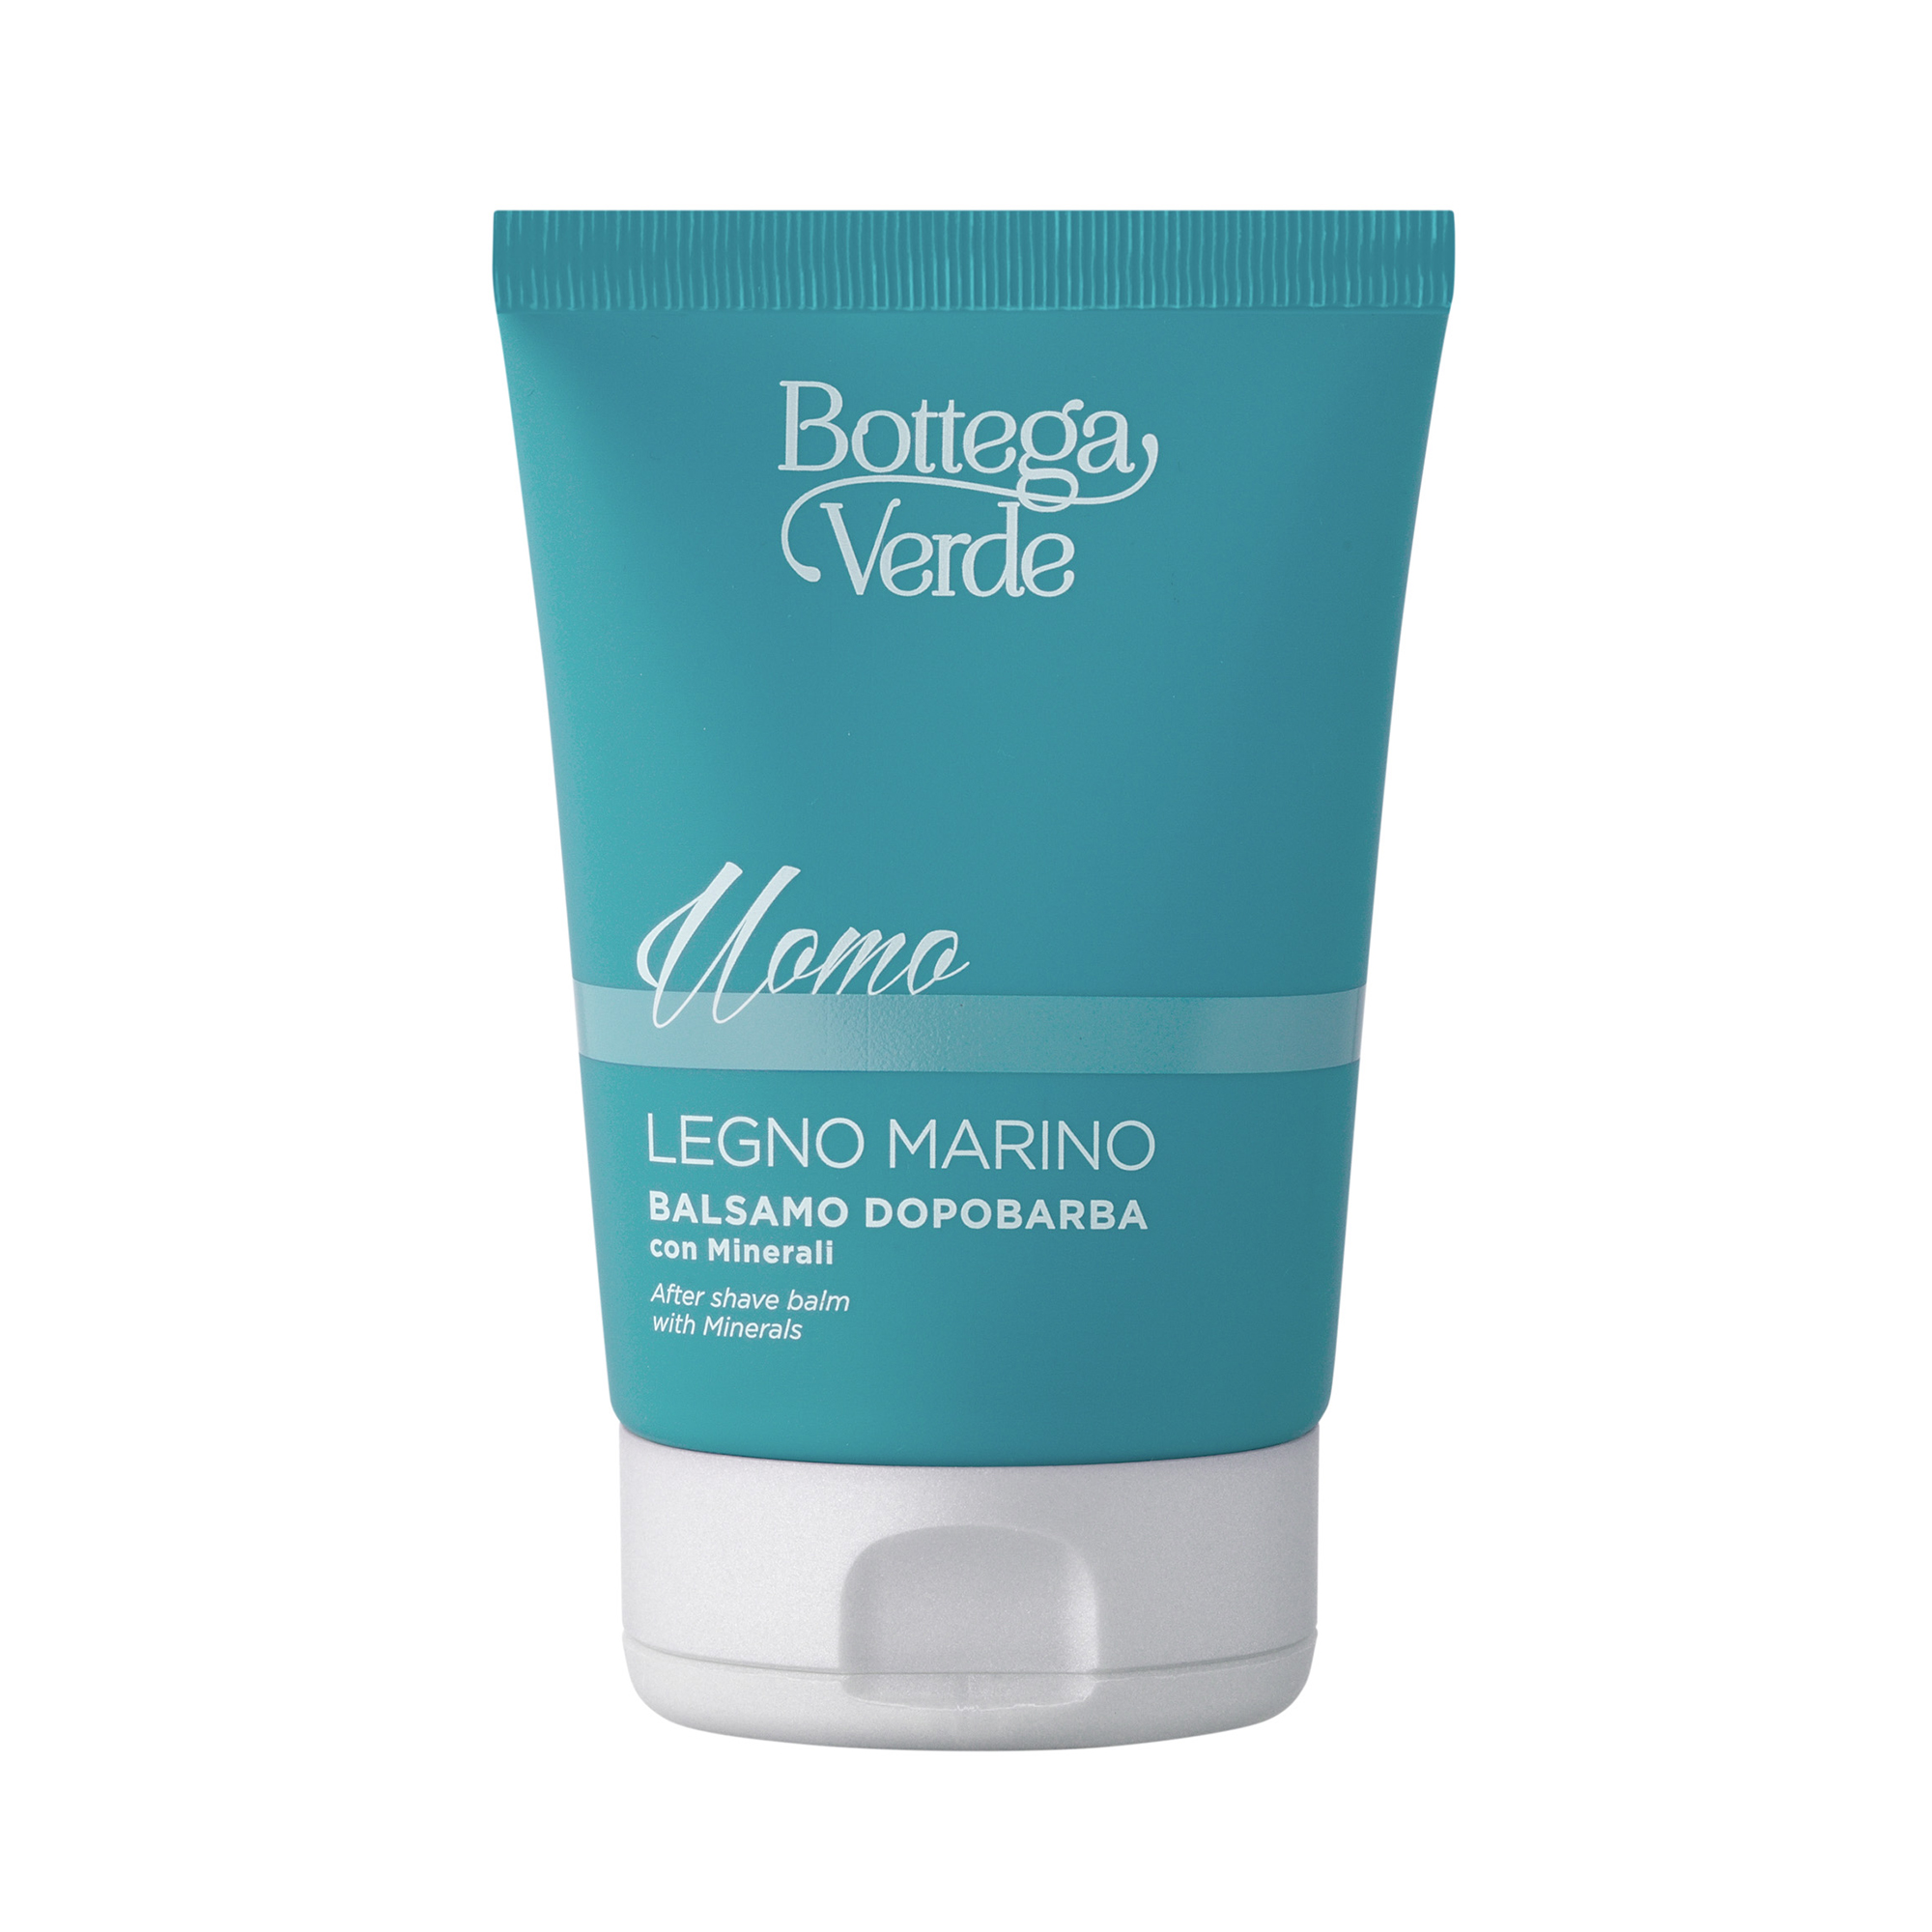 UOMO - Legno Marino - after shave balm with Minerals (75 ml)